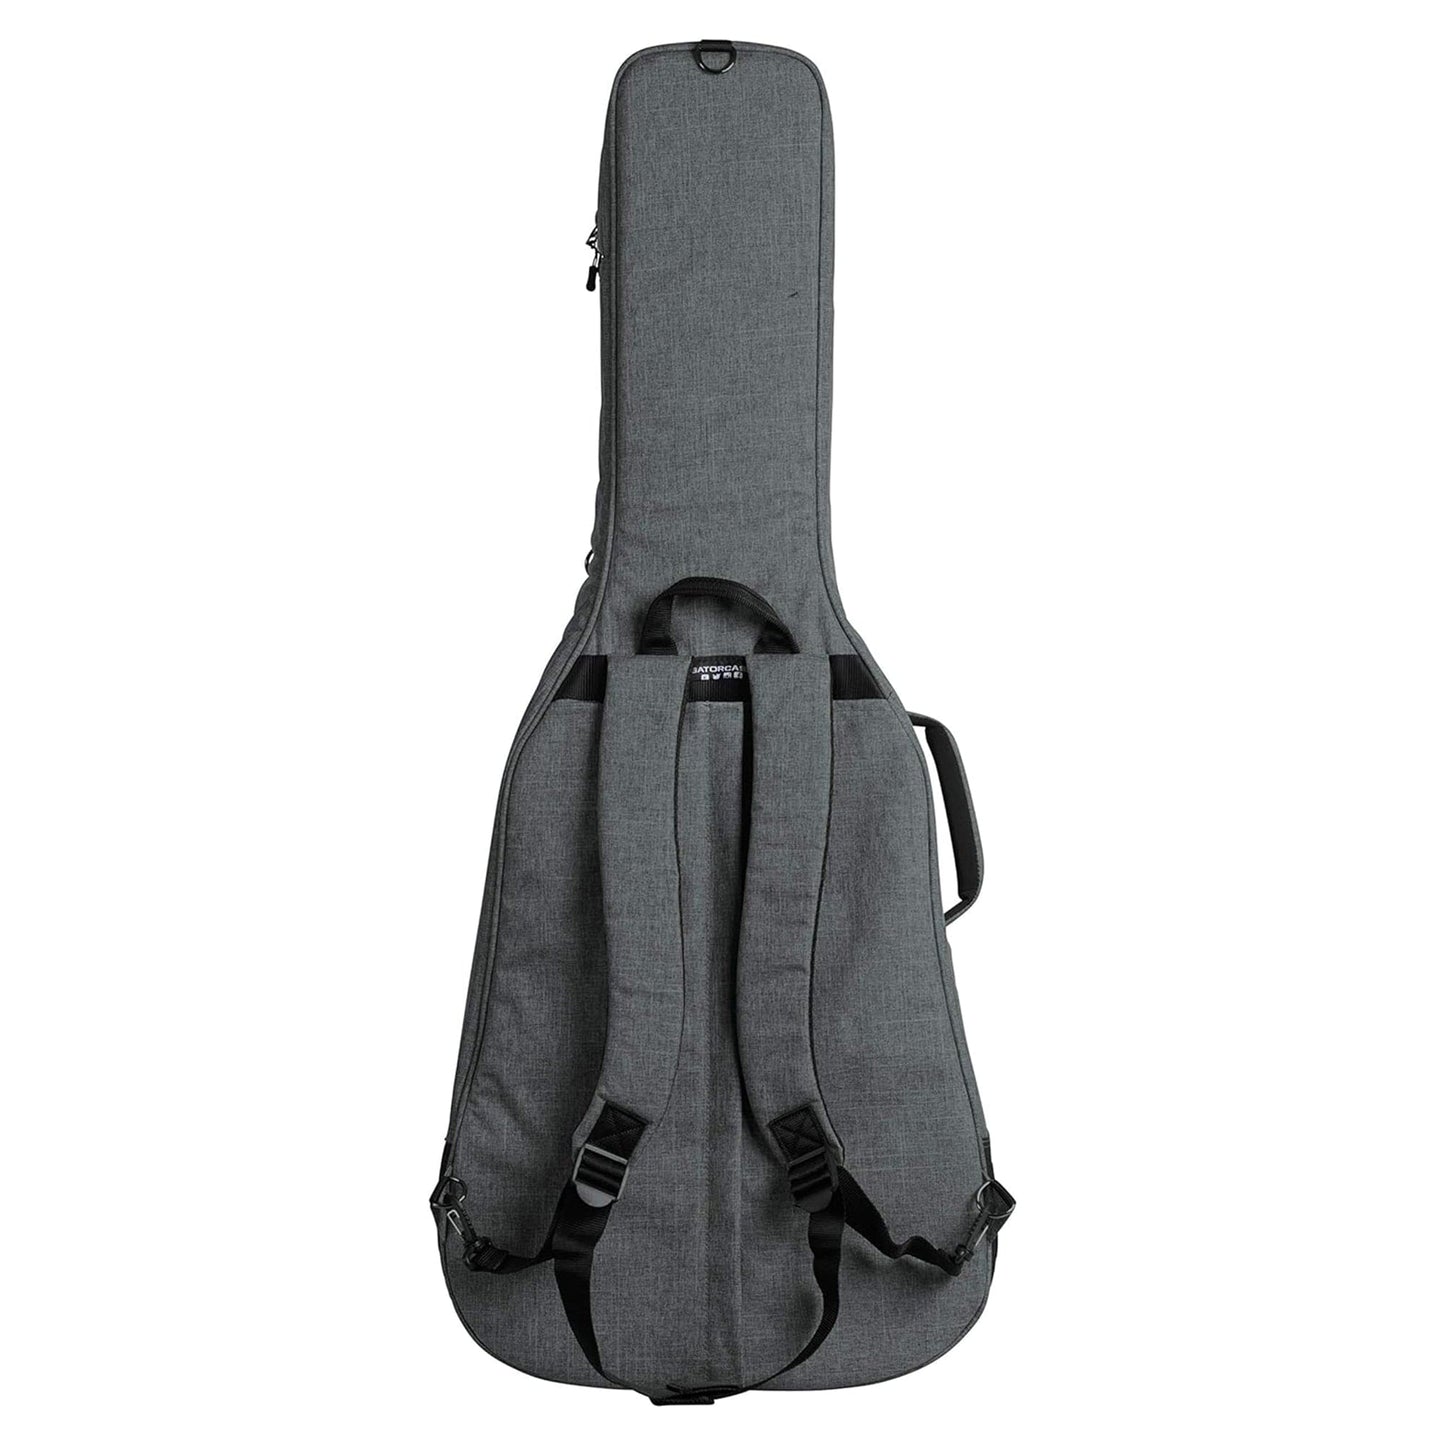 Gator Transit Acoustic Guitar Gig Bag Light Grey Accessories / Cases and Gig Bags / Guitar Cases